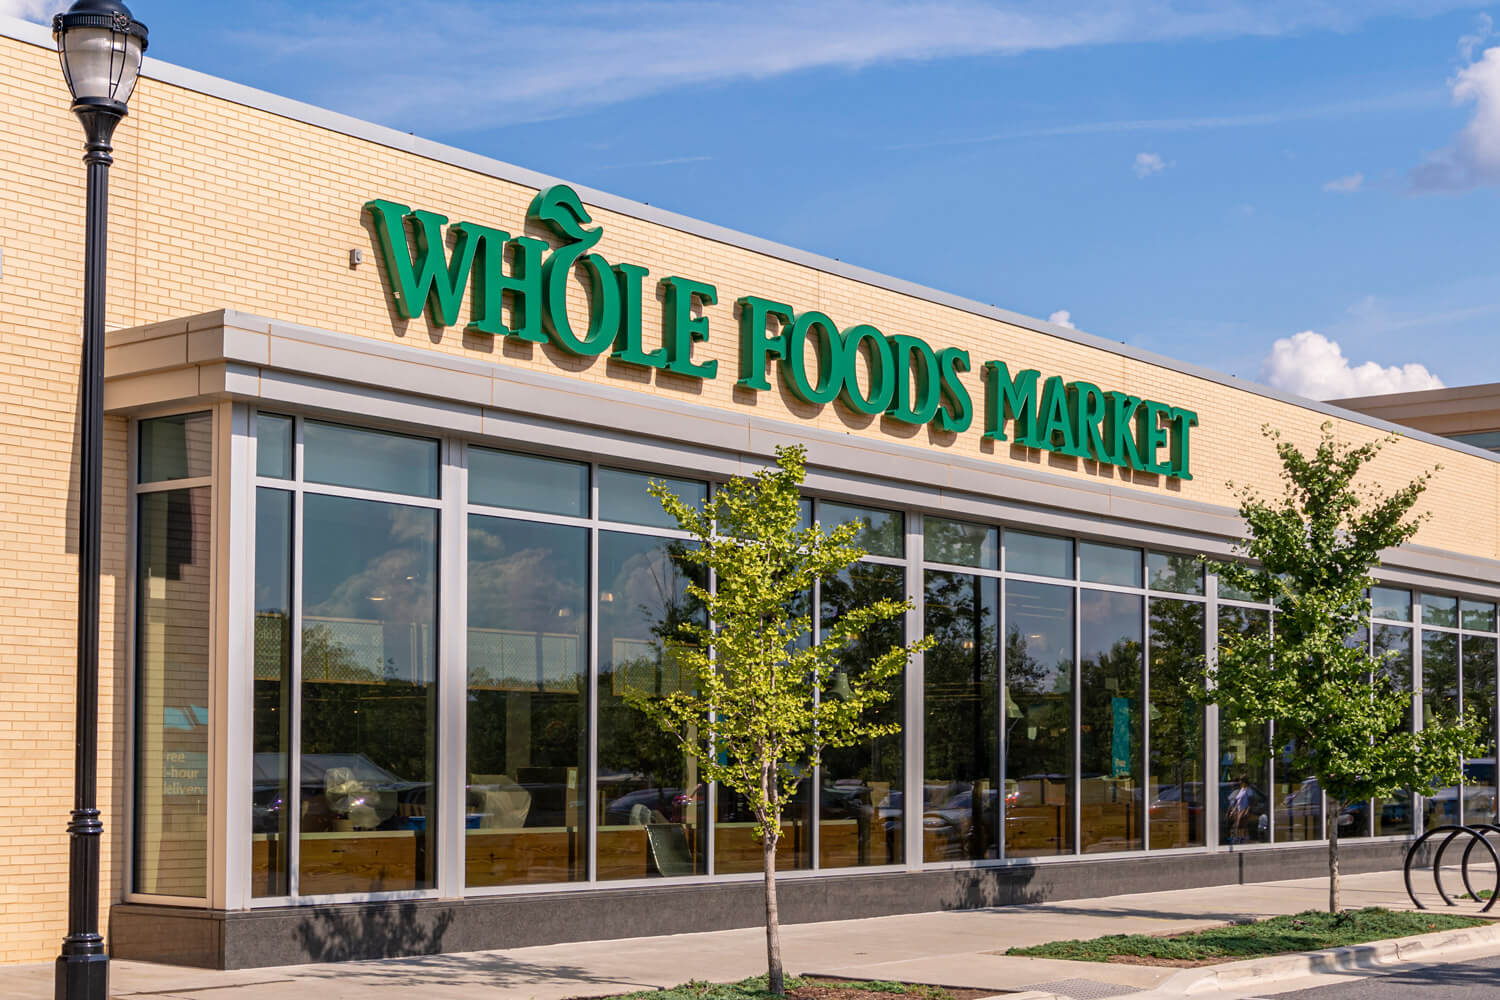 Your groceries are just steps away at Whole Foods Market